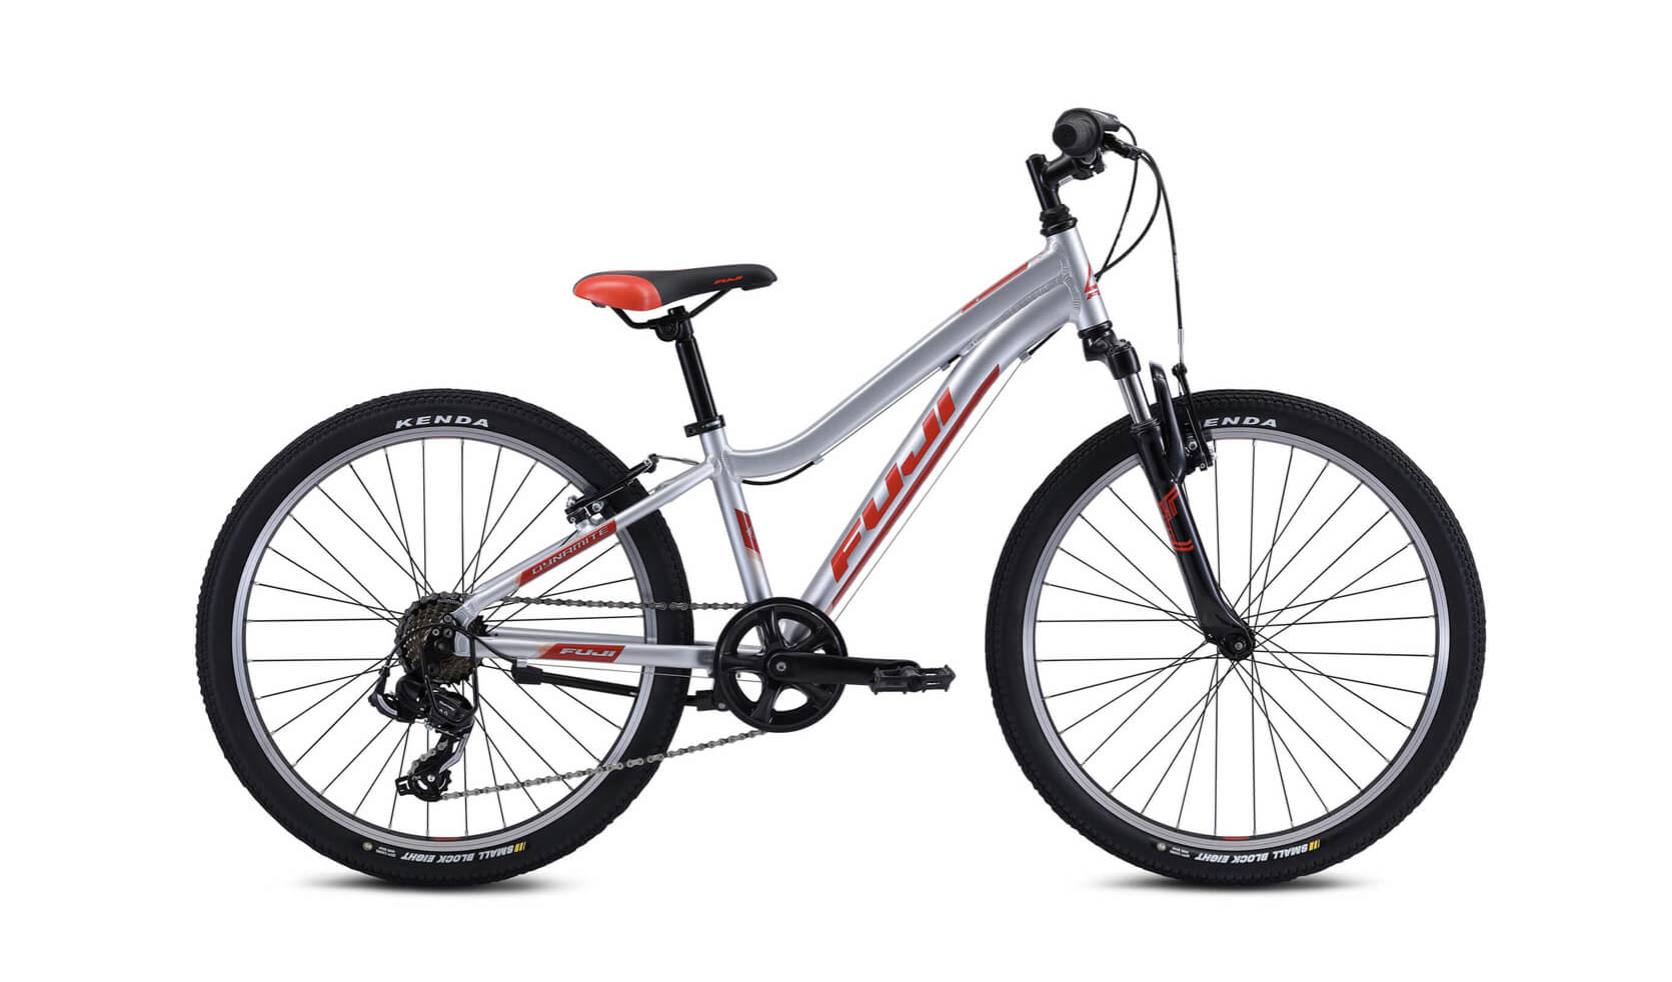 Dynamite 24 Mountain Bike Silver Sgvbicycles – SGV Bicycles